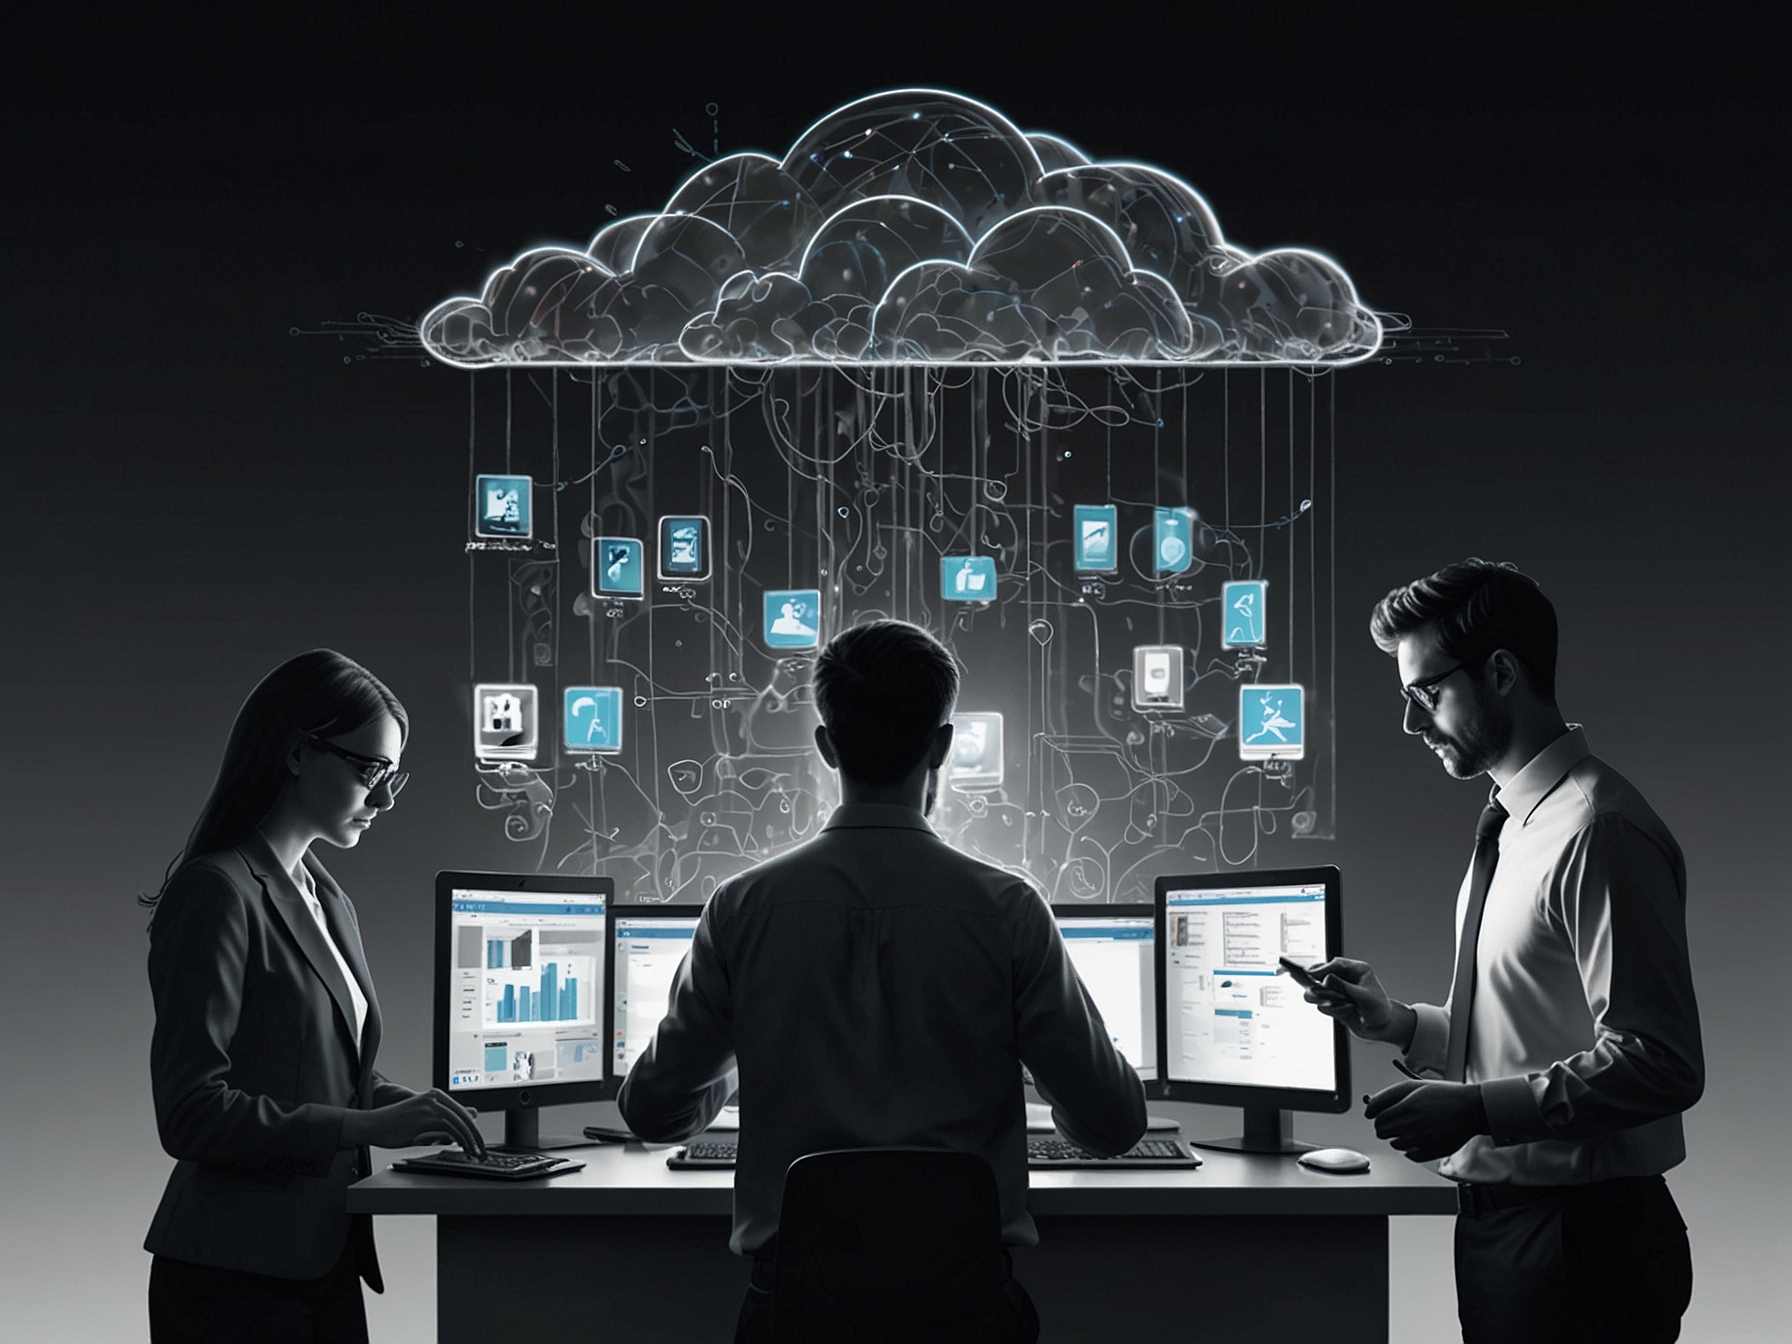 Illustration of employees accessing cloud-based document management systems remotely, showcasing the flexibility and enhanced security features that support hybrid work models.